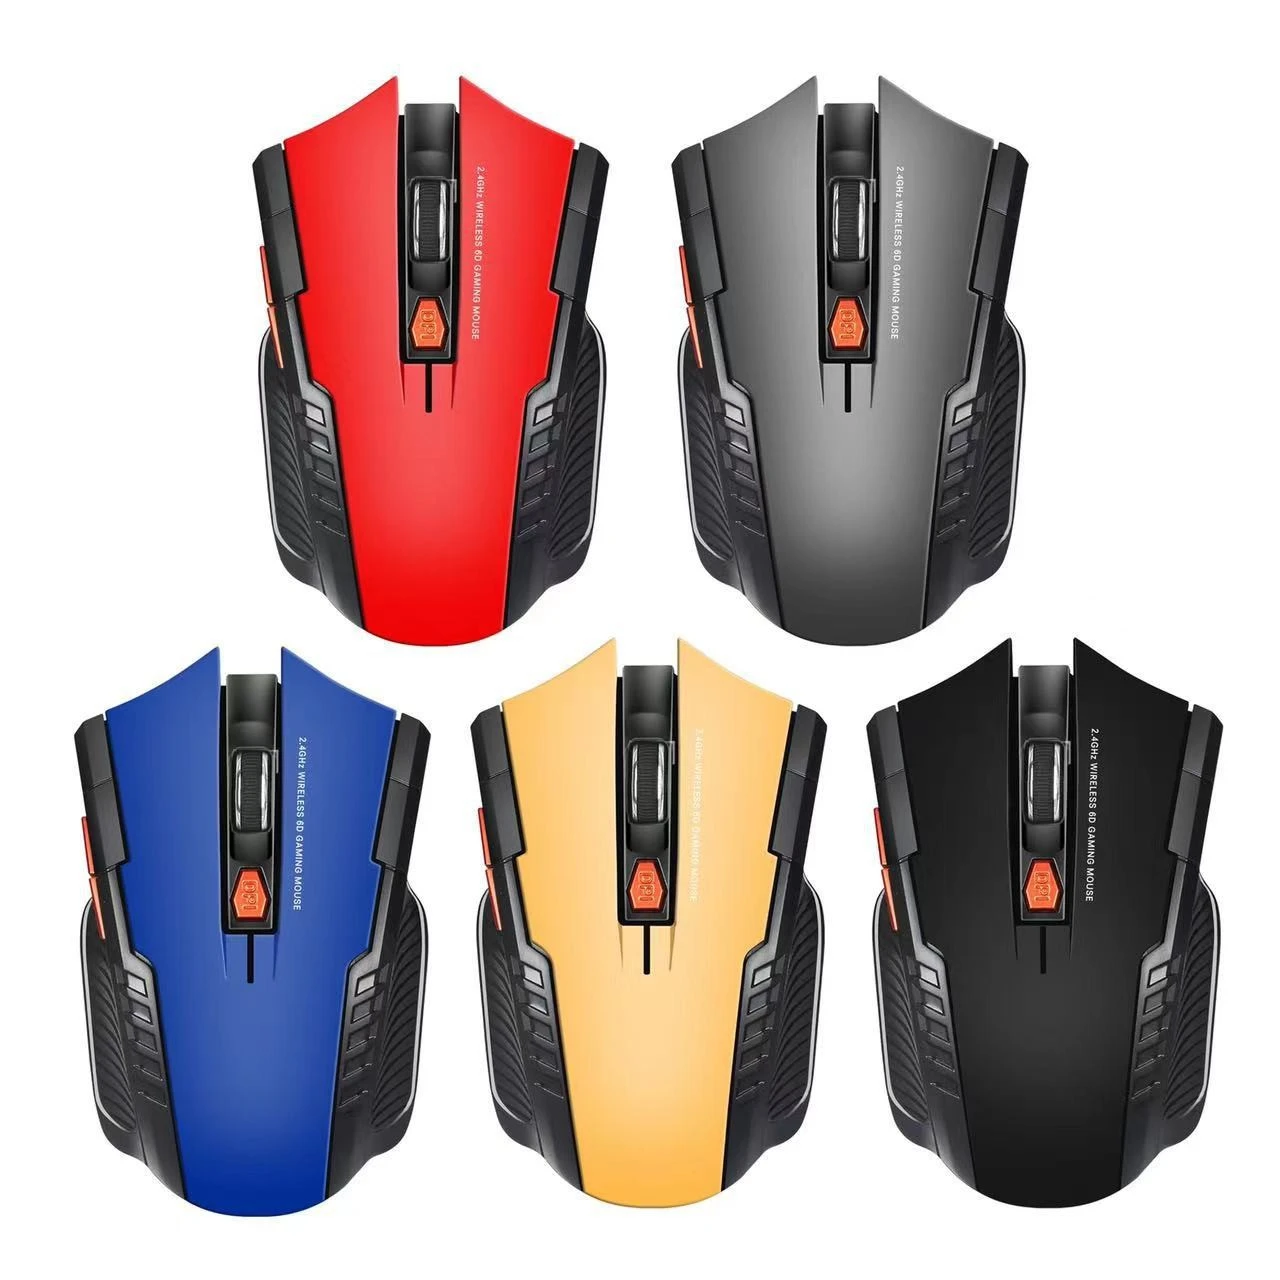 2.4GHz Wireless Gaming Mouse Portable Mouse Gamer for Computer PC Laptop Accessory with USB Receiver Wireless Mice Office